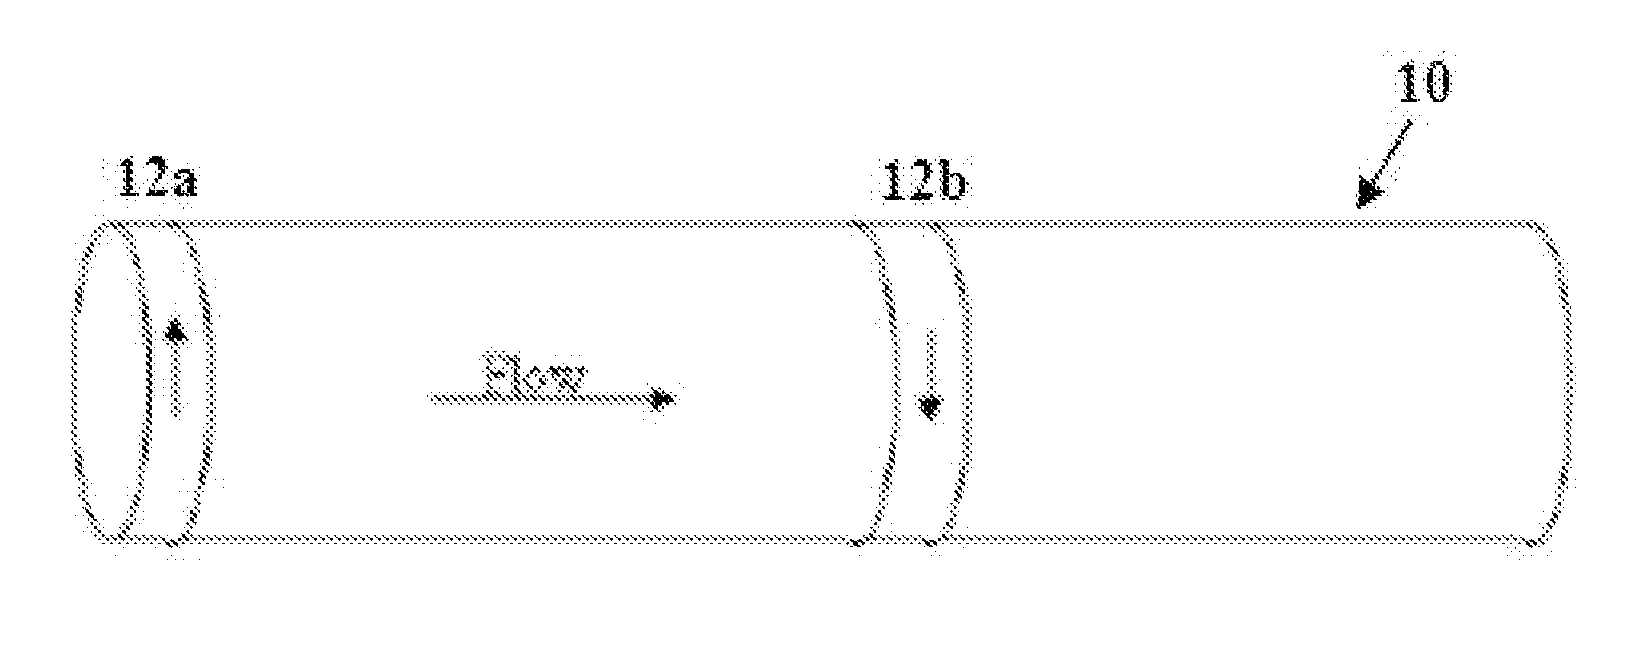 System and method for turbulent flow drag reduction